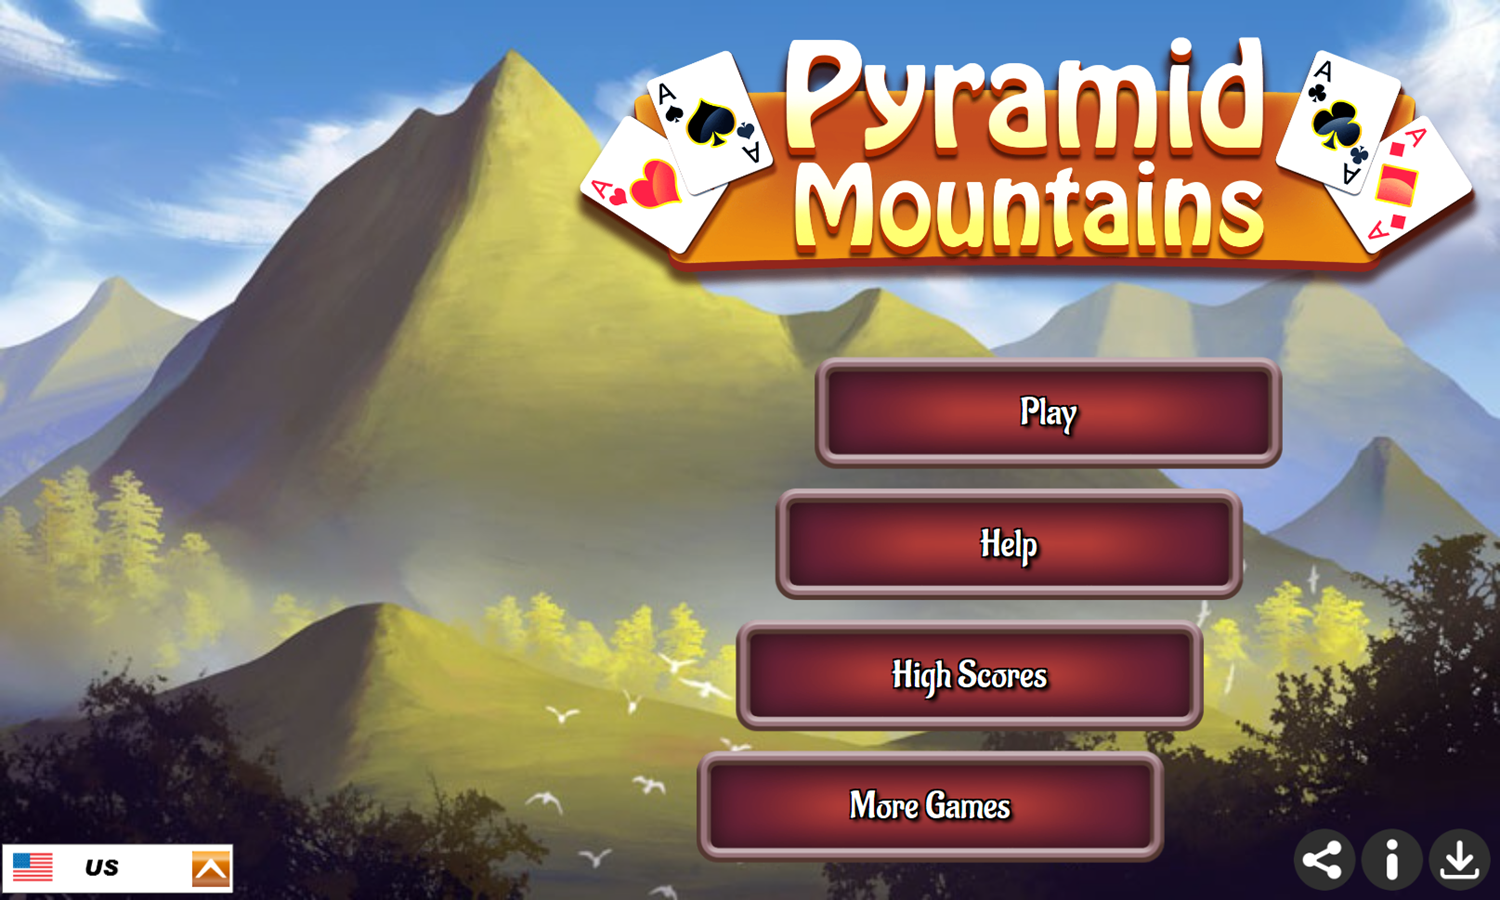 Pyramid Mountains Solitaire Game Welcome Screen Screenshot.